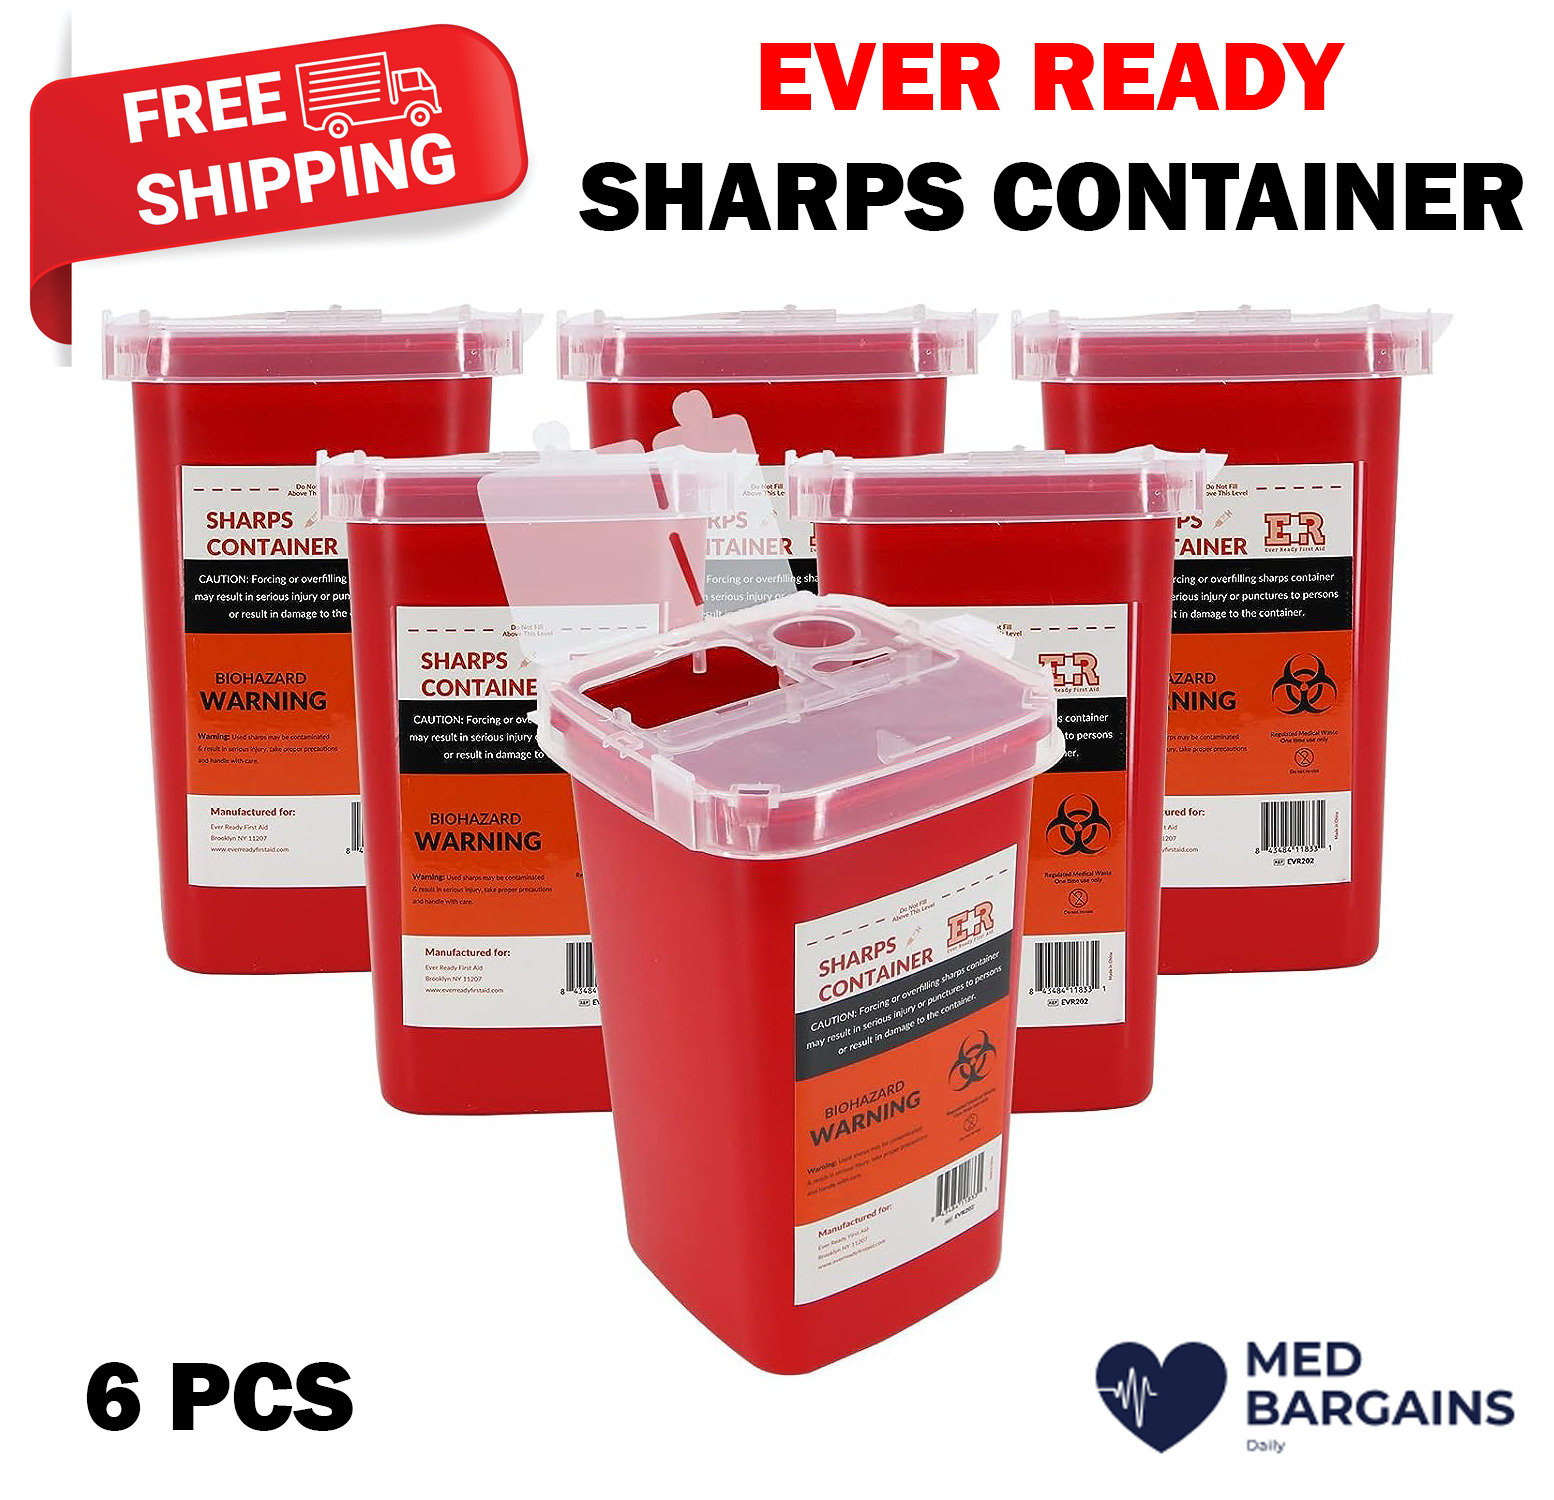 Ever Ready EVR202 Sharps Container Waste Disposal 1 Quarts / 32oz - RED 6PCS